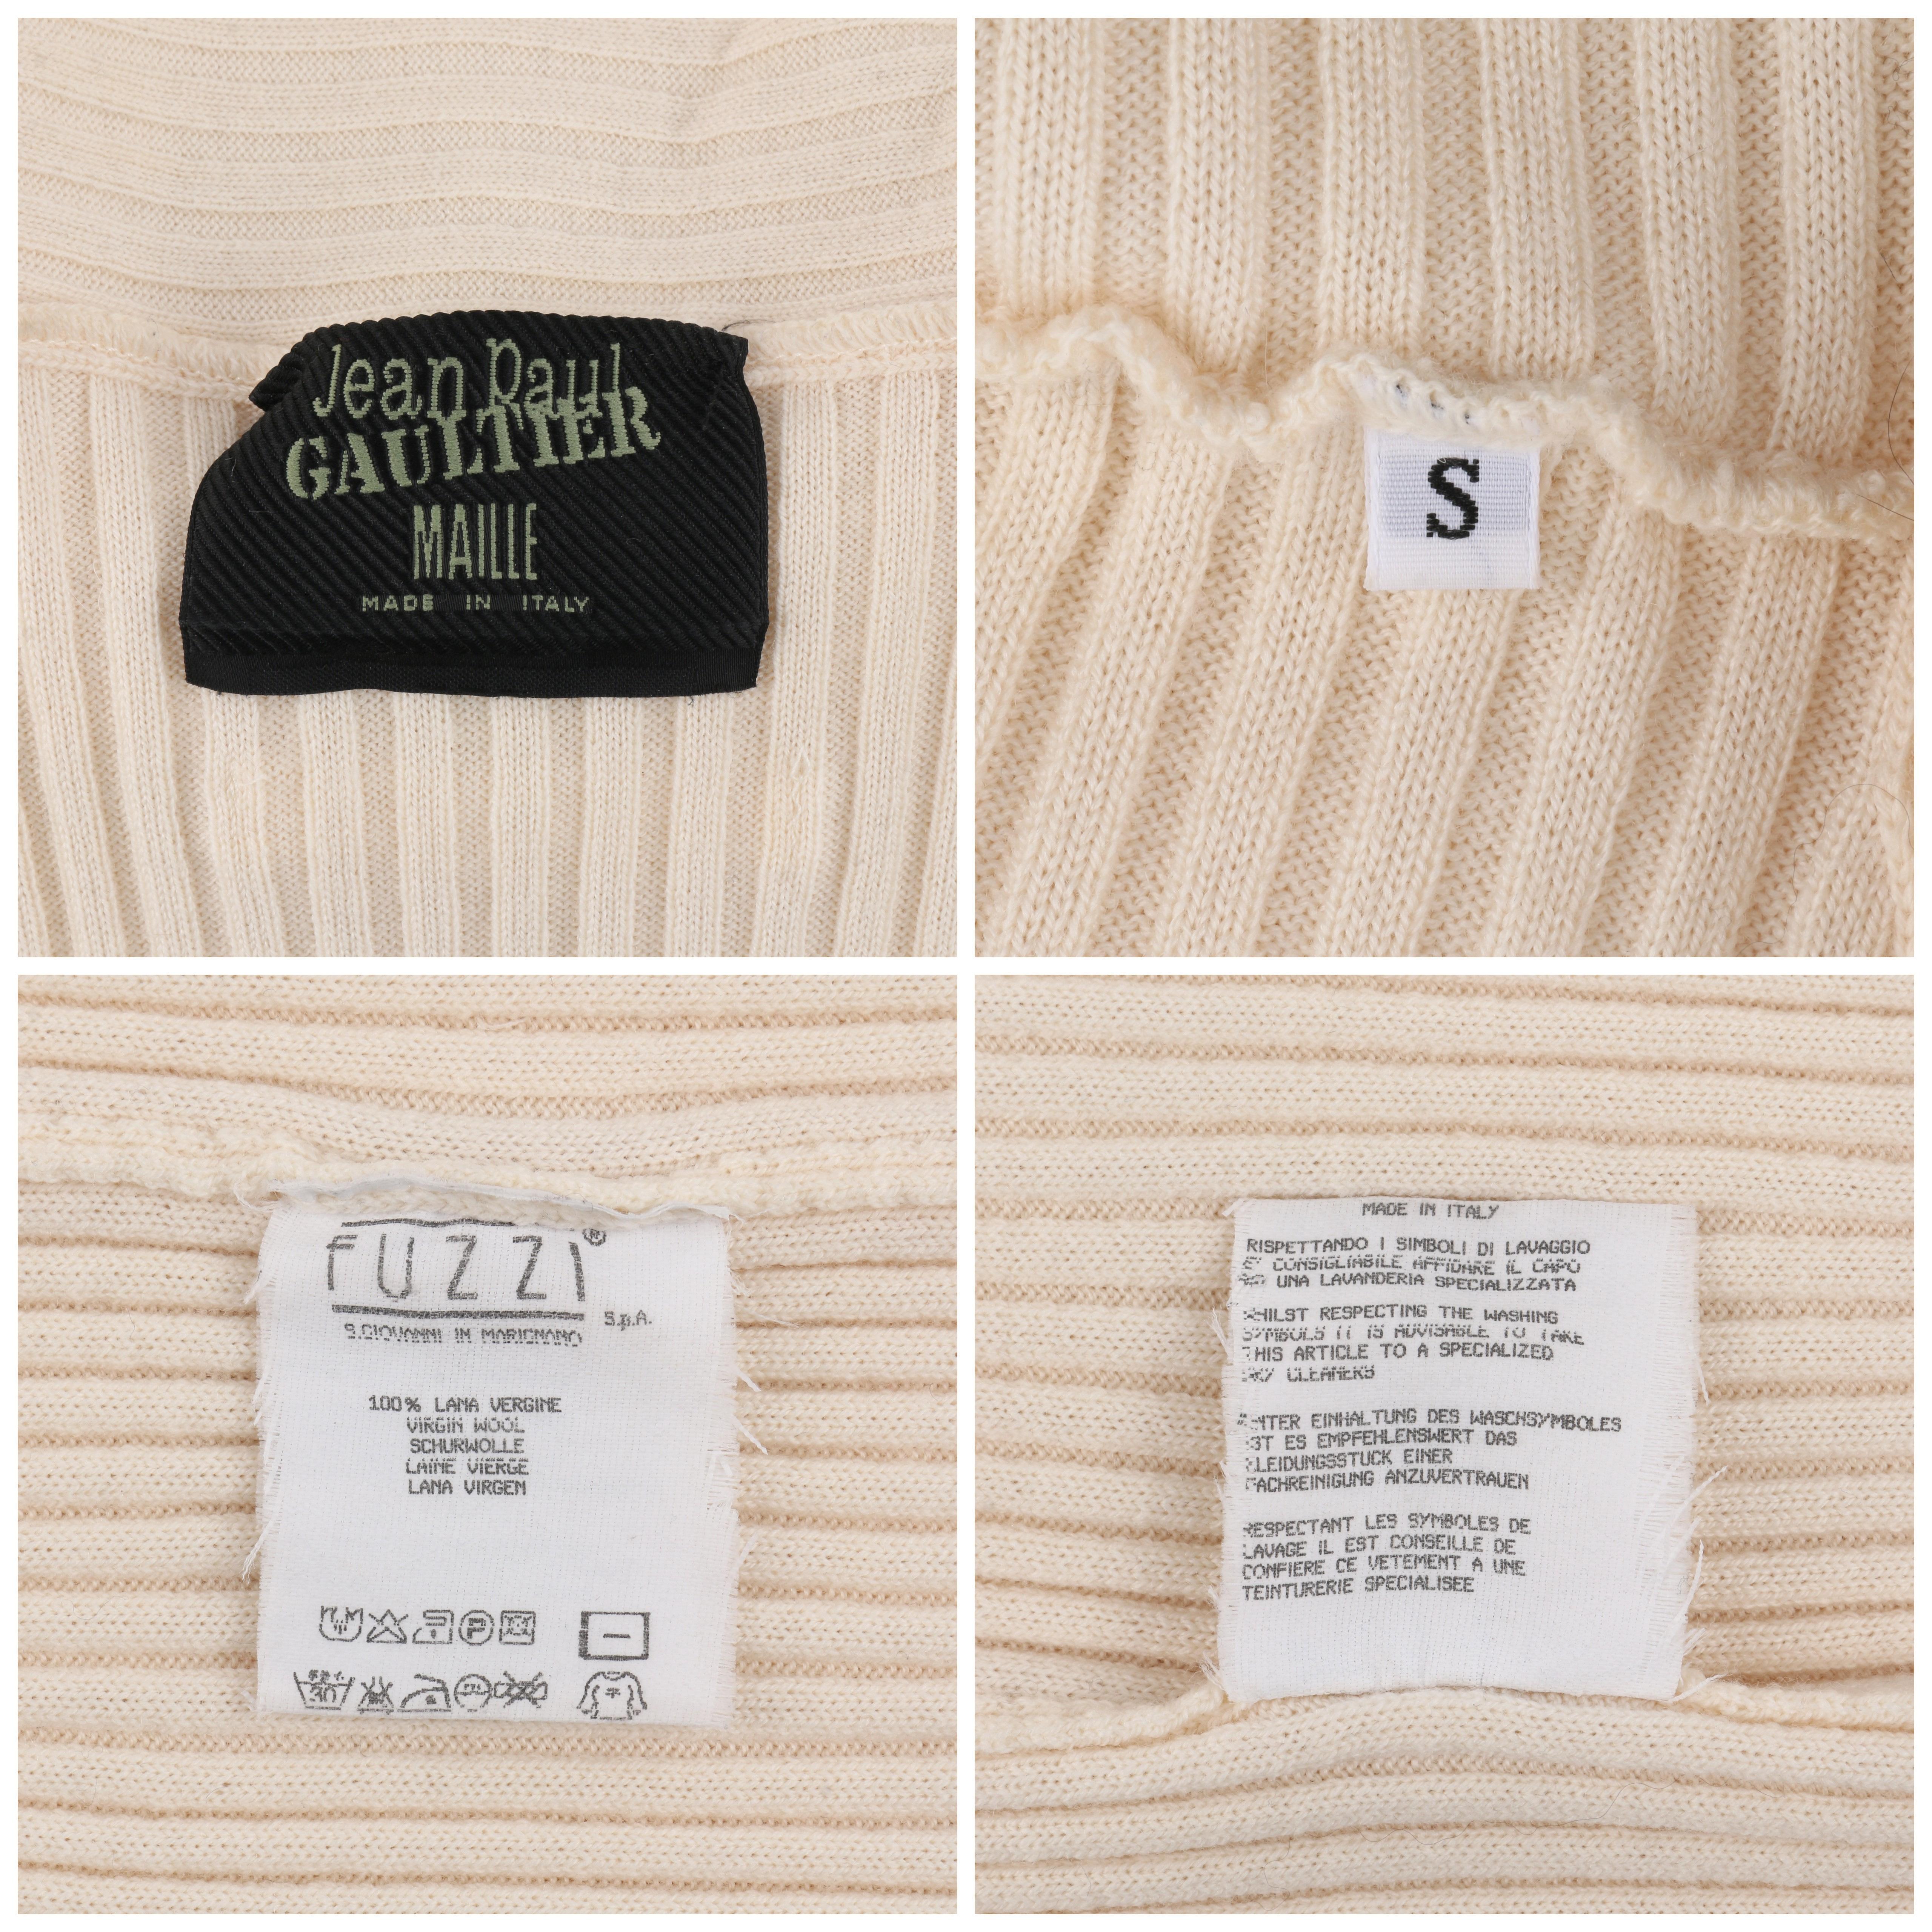 JEAN PAUL GAULTIER Mailie c.1990’s Ivory Turtleneck Ribbed Knit Wool Sweater 3